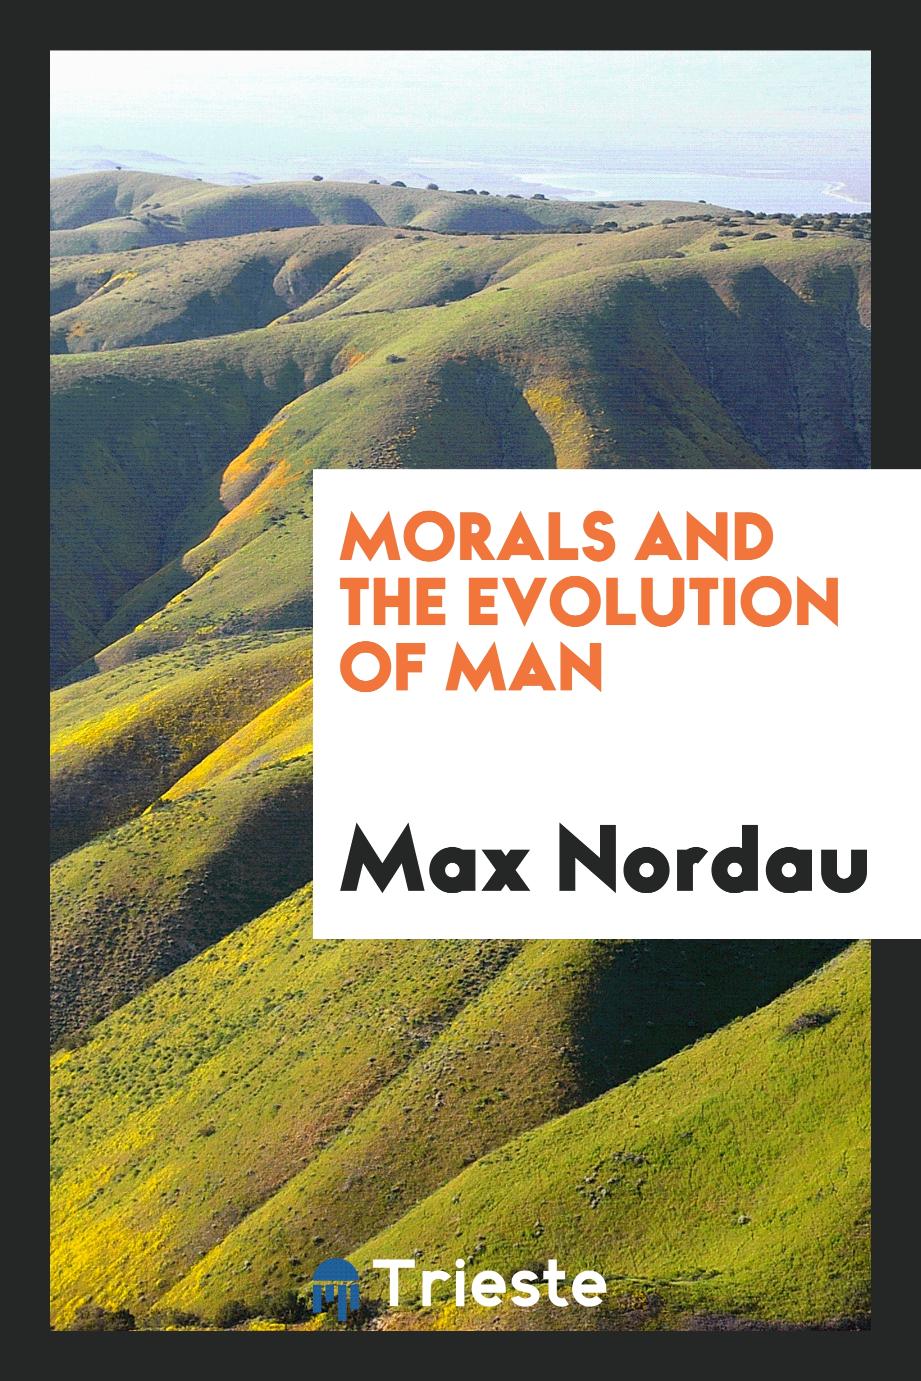 Morals and the evolution of man